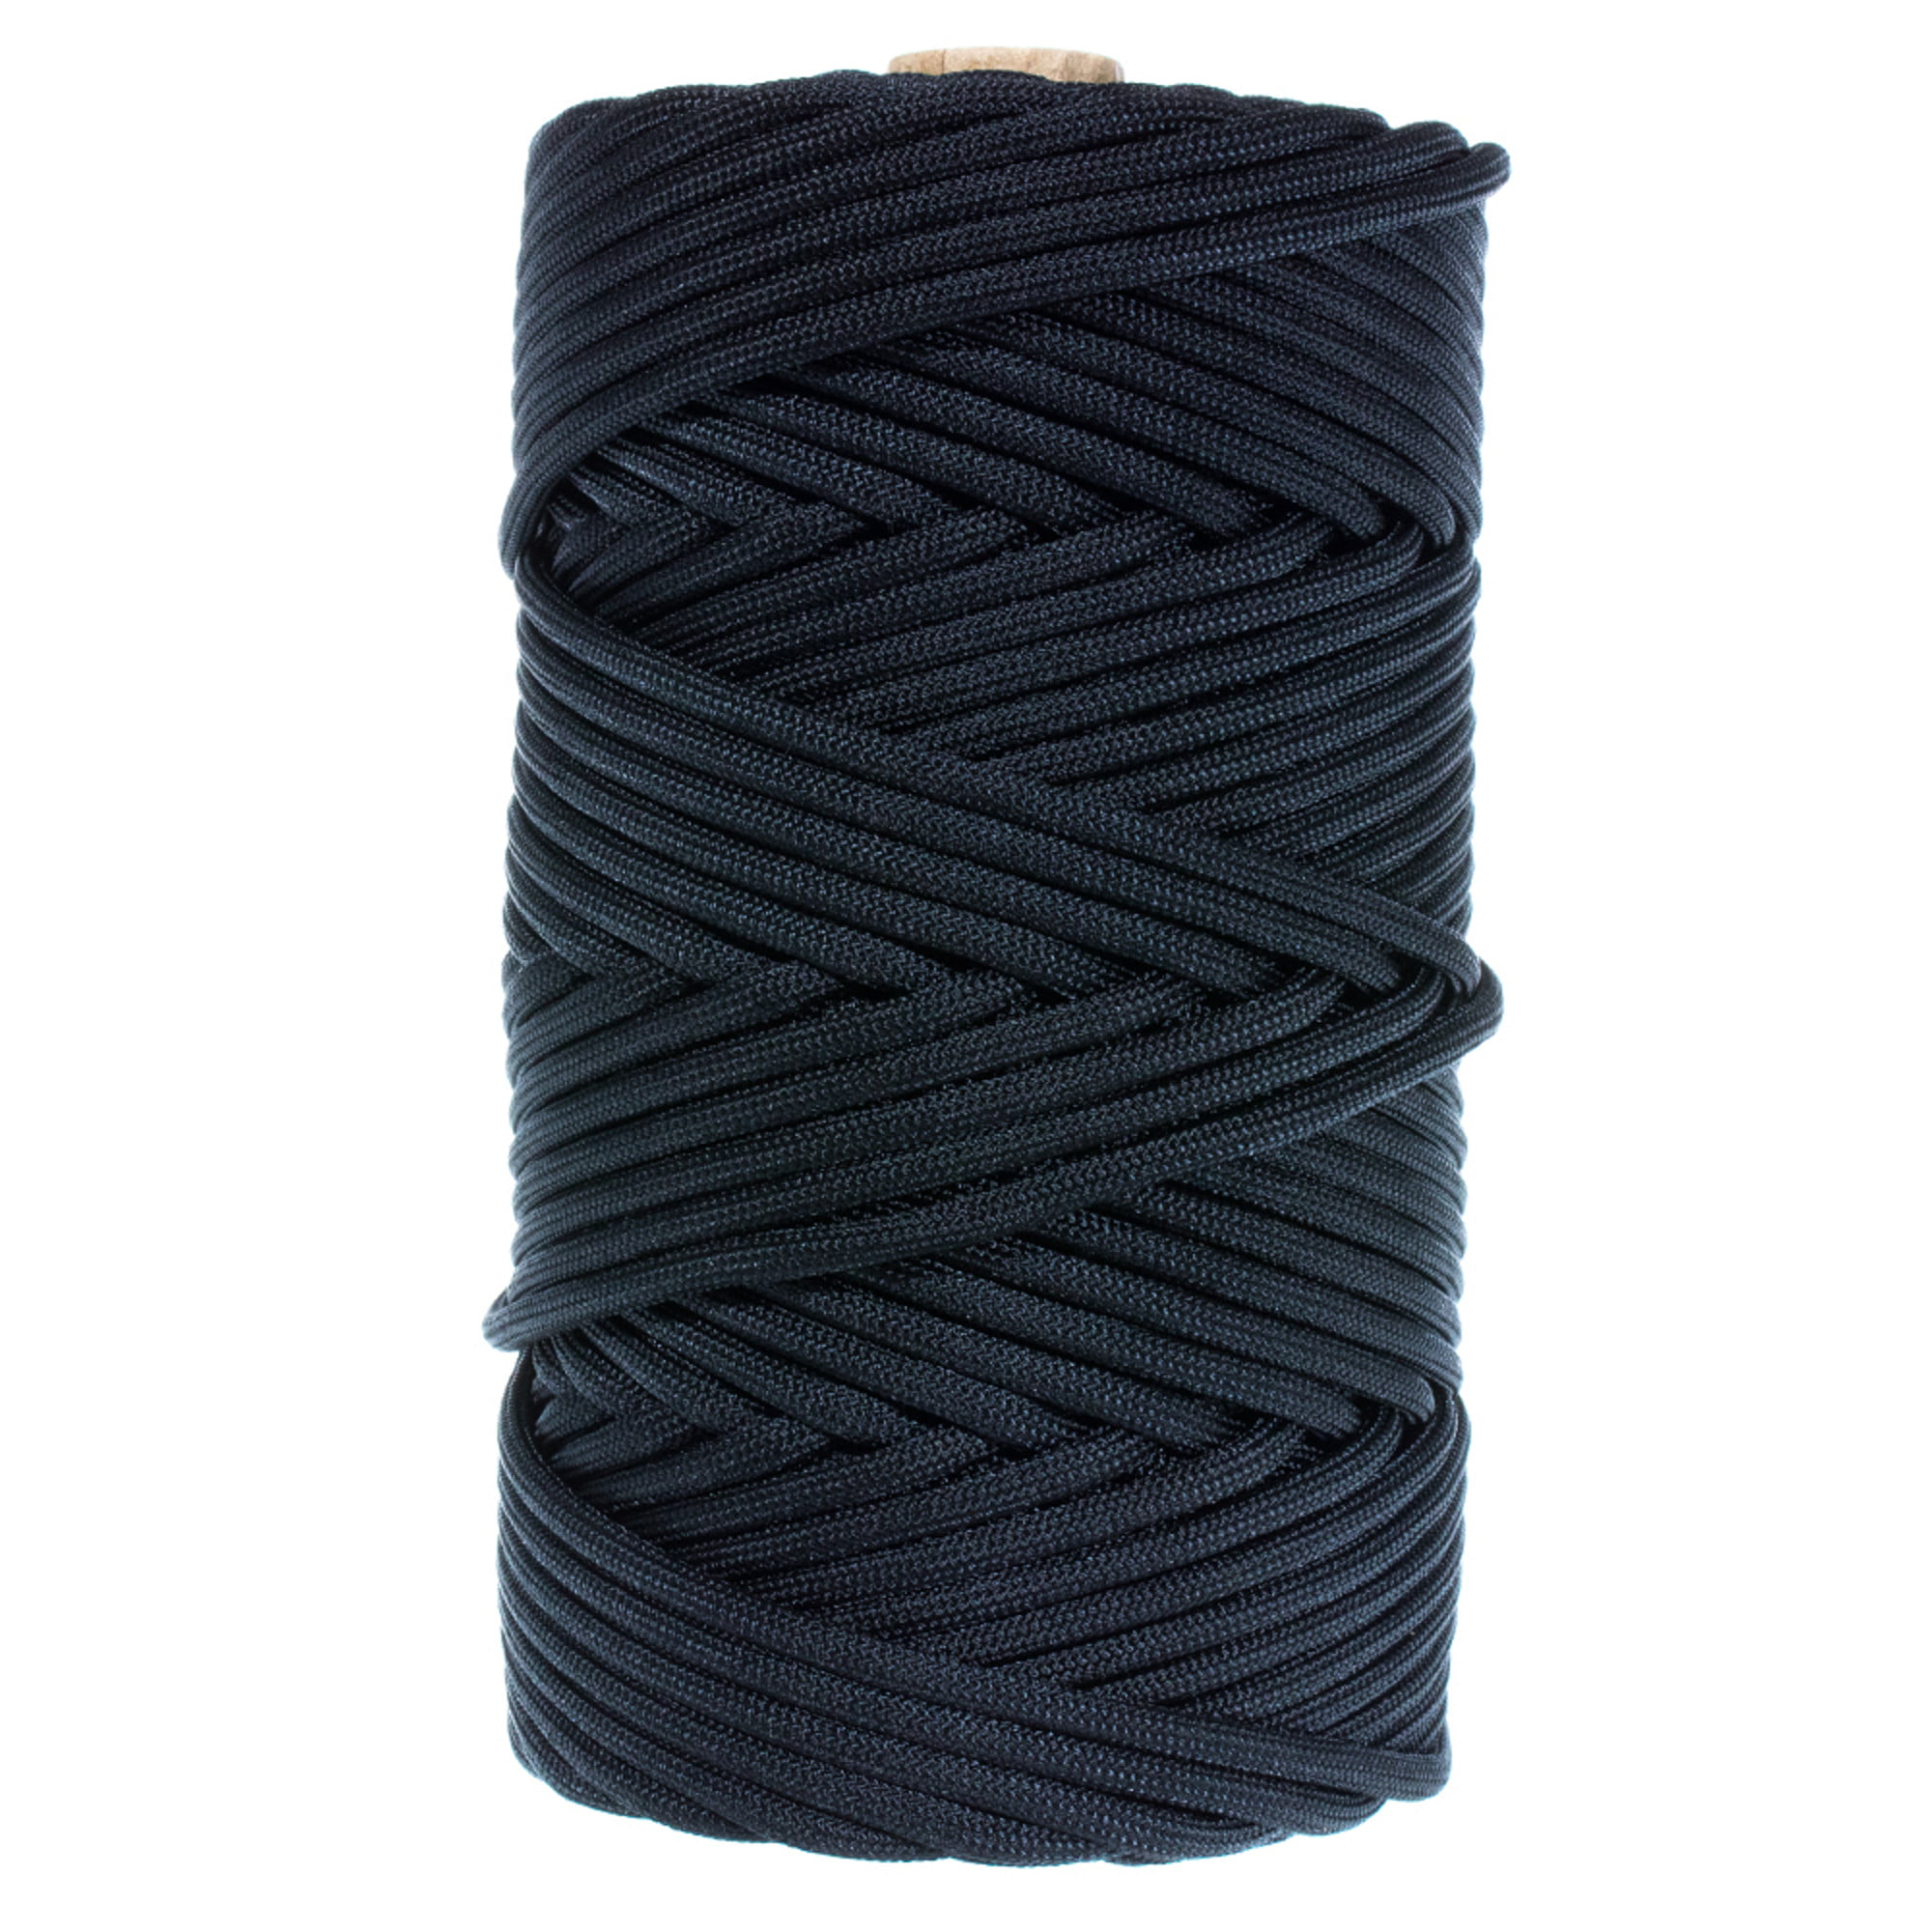 MADE IN USA 100ft 550 LB TYPE III Nylon paracord Reflective Black 7 Strand 